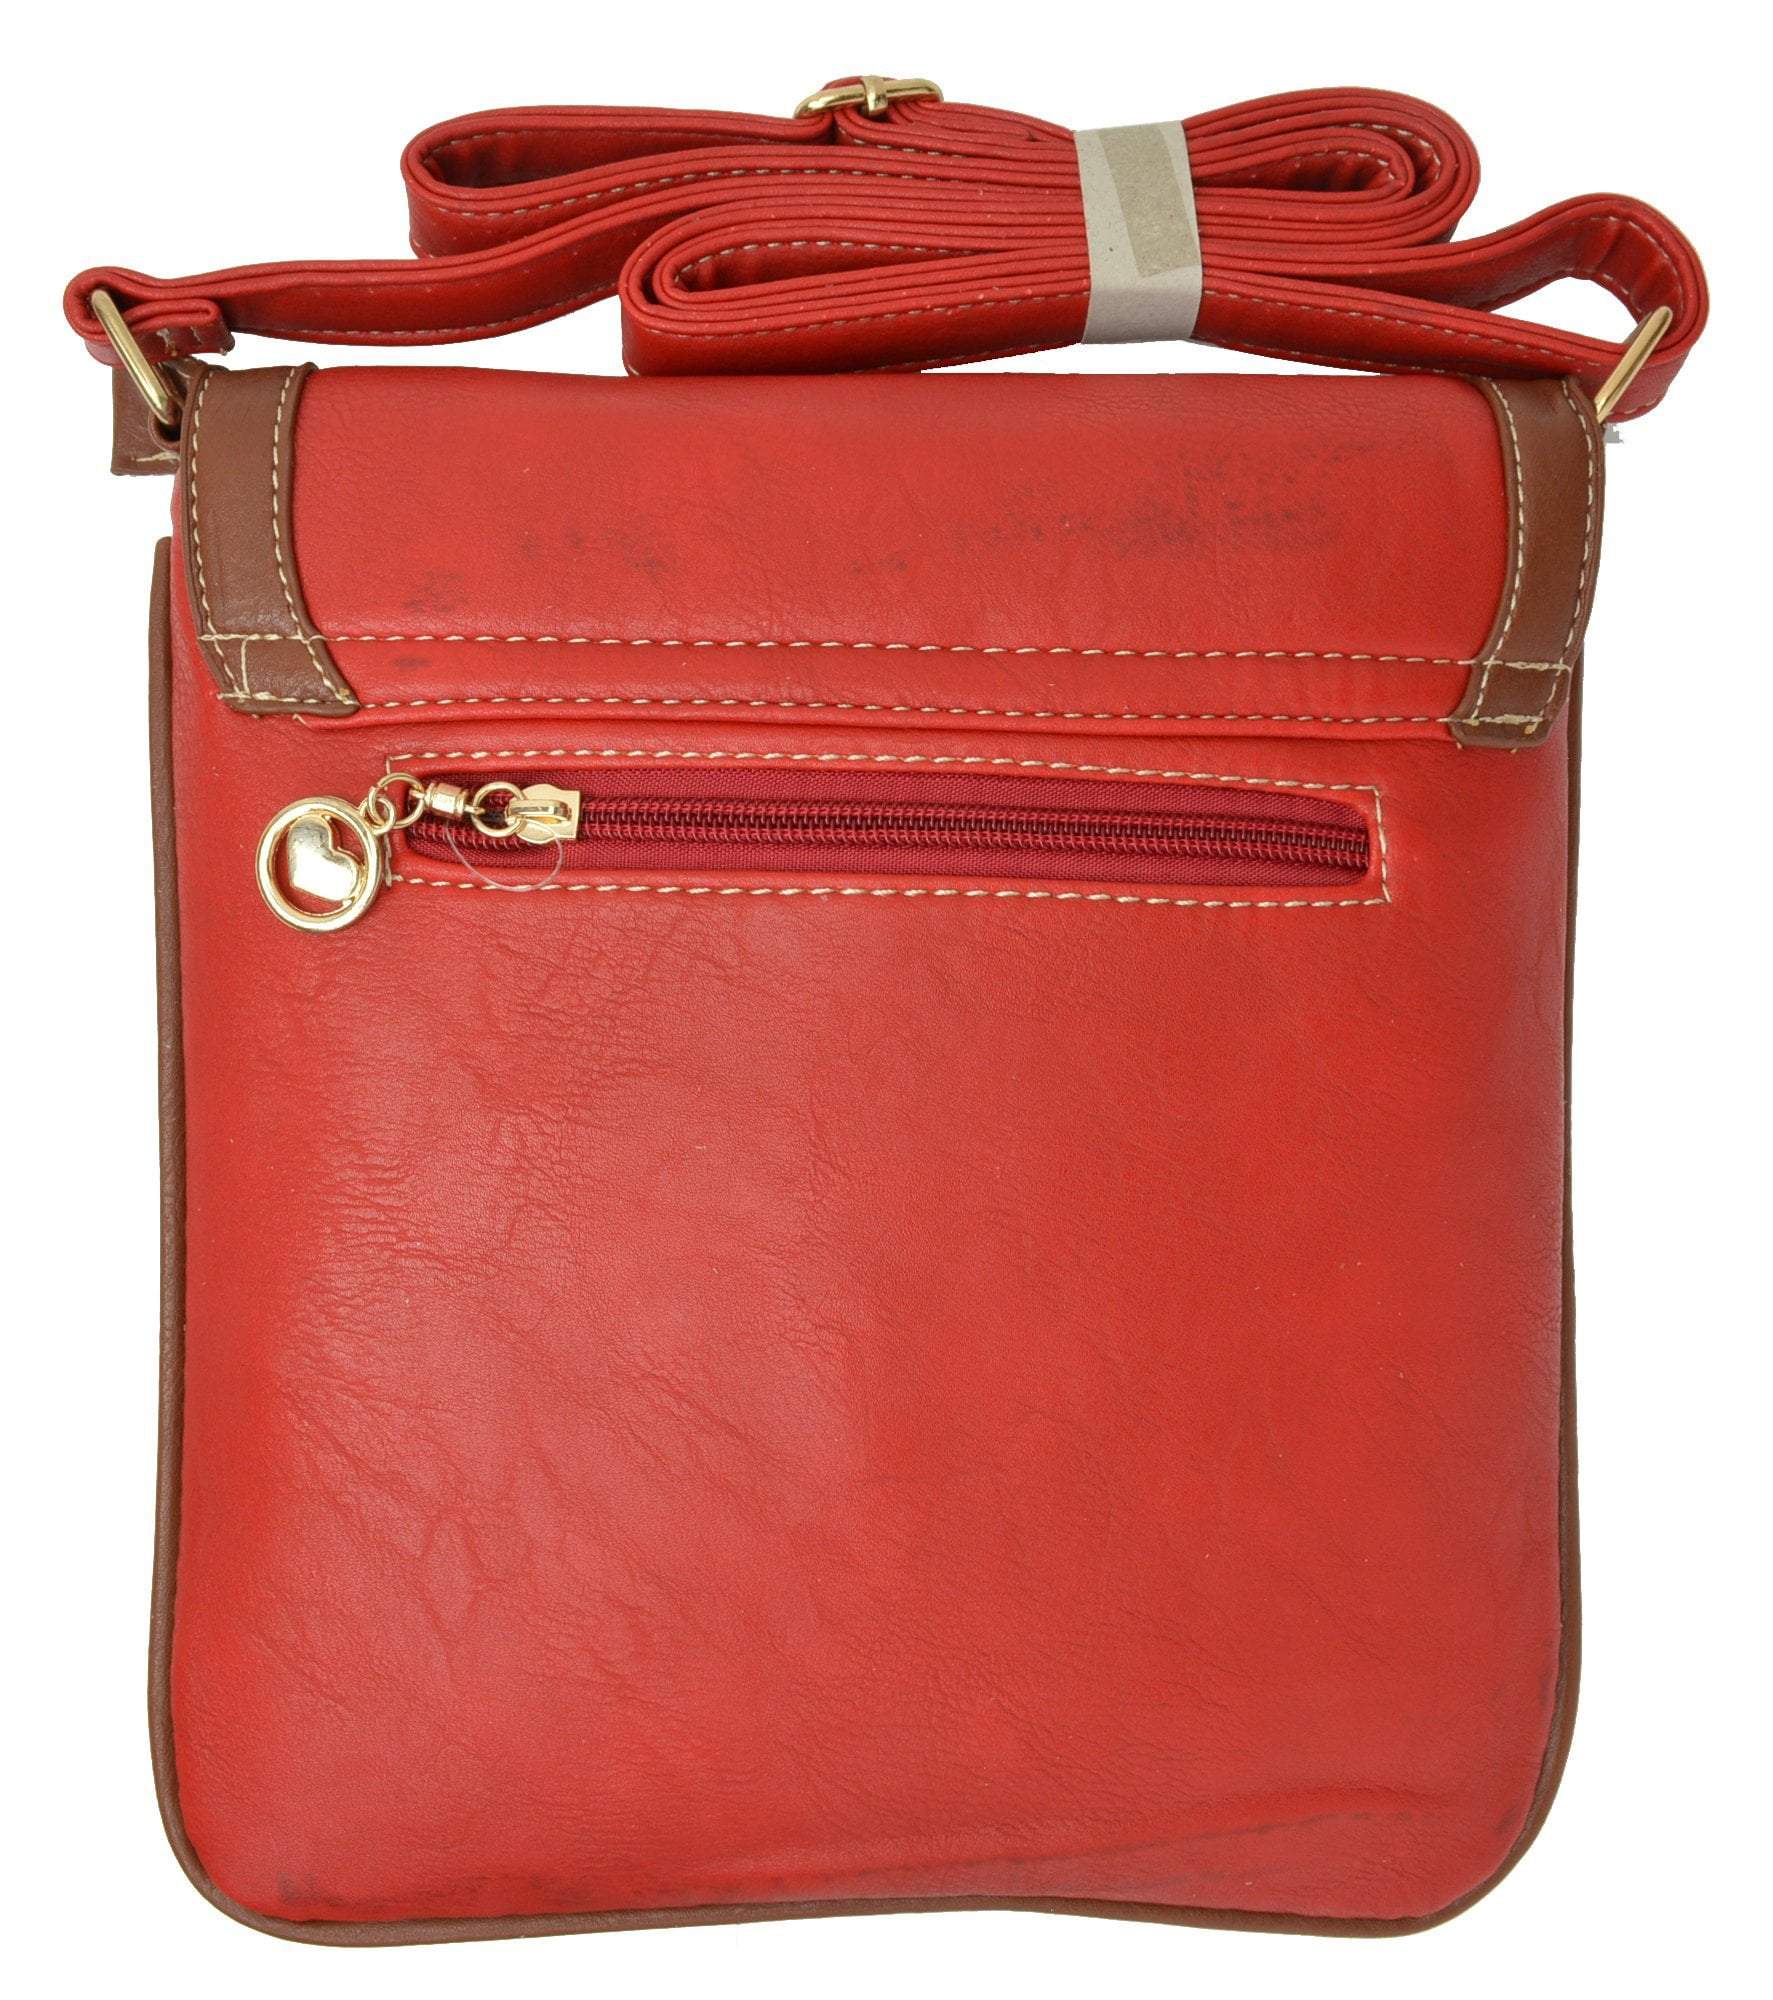 Adjustable Leather Crossbody Strap in Cuoio